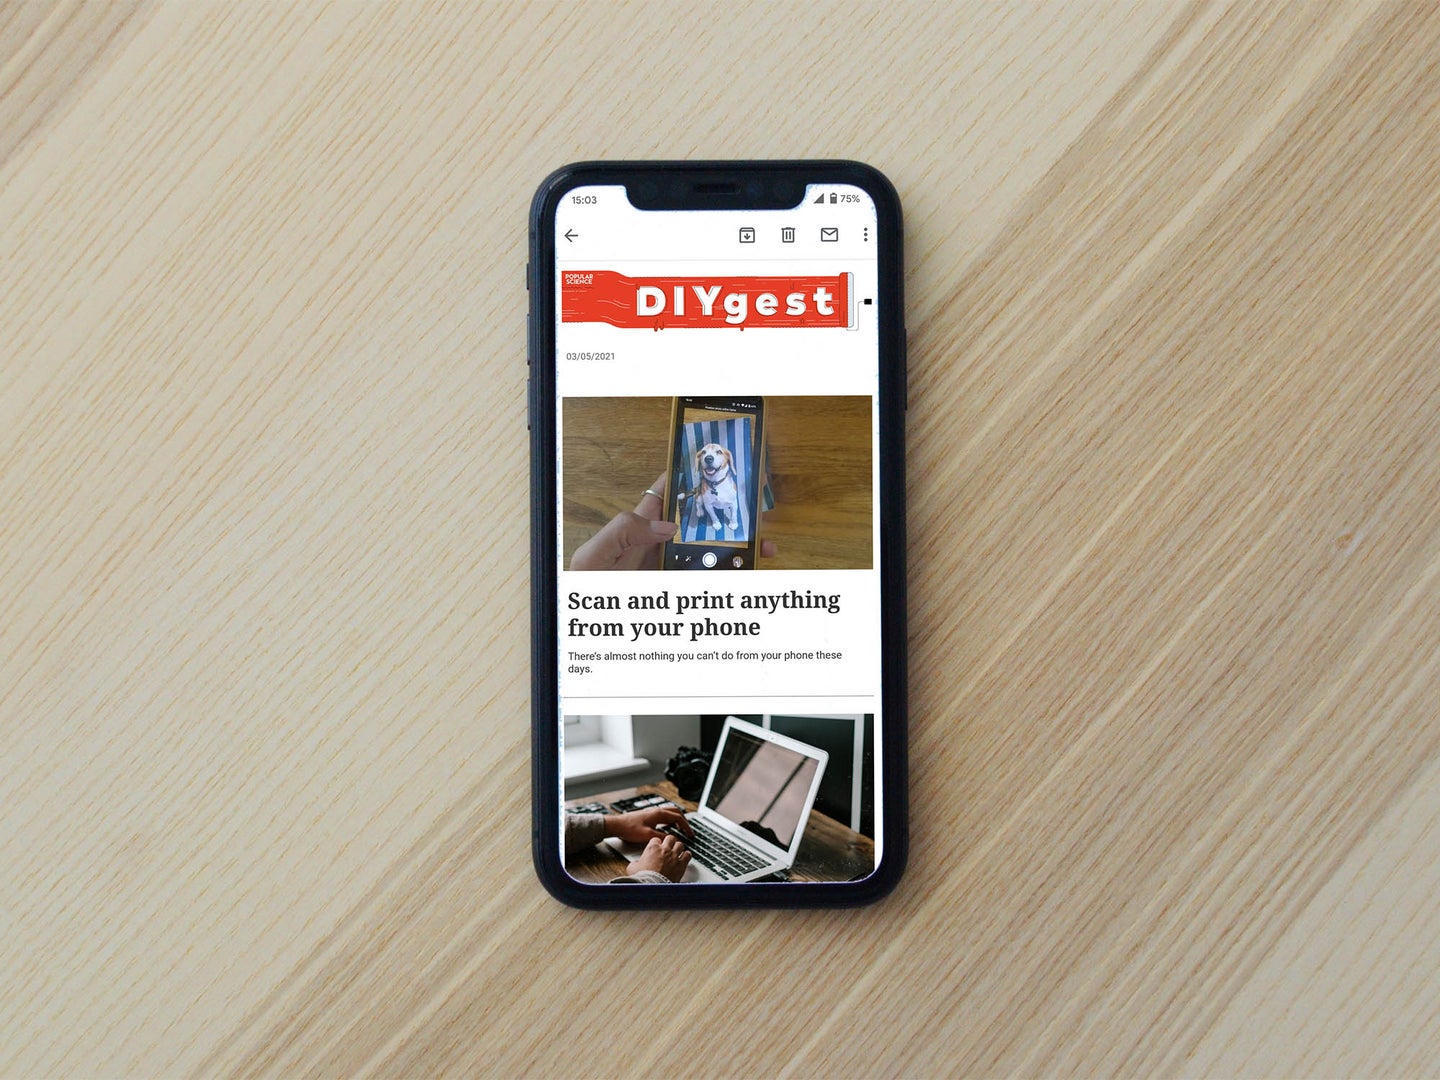 iPhone on a wooden table with a newsletter on the screen